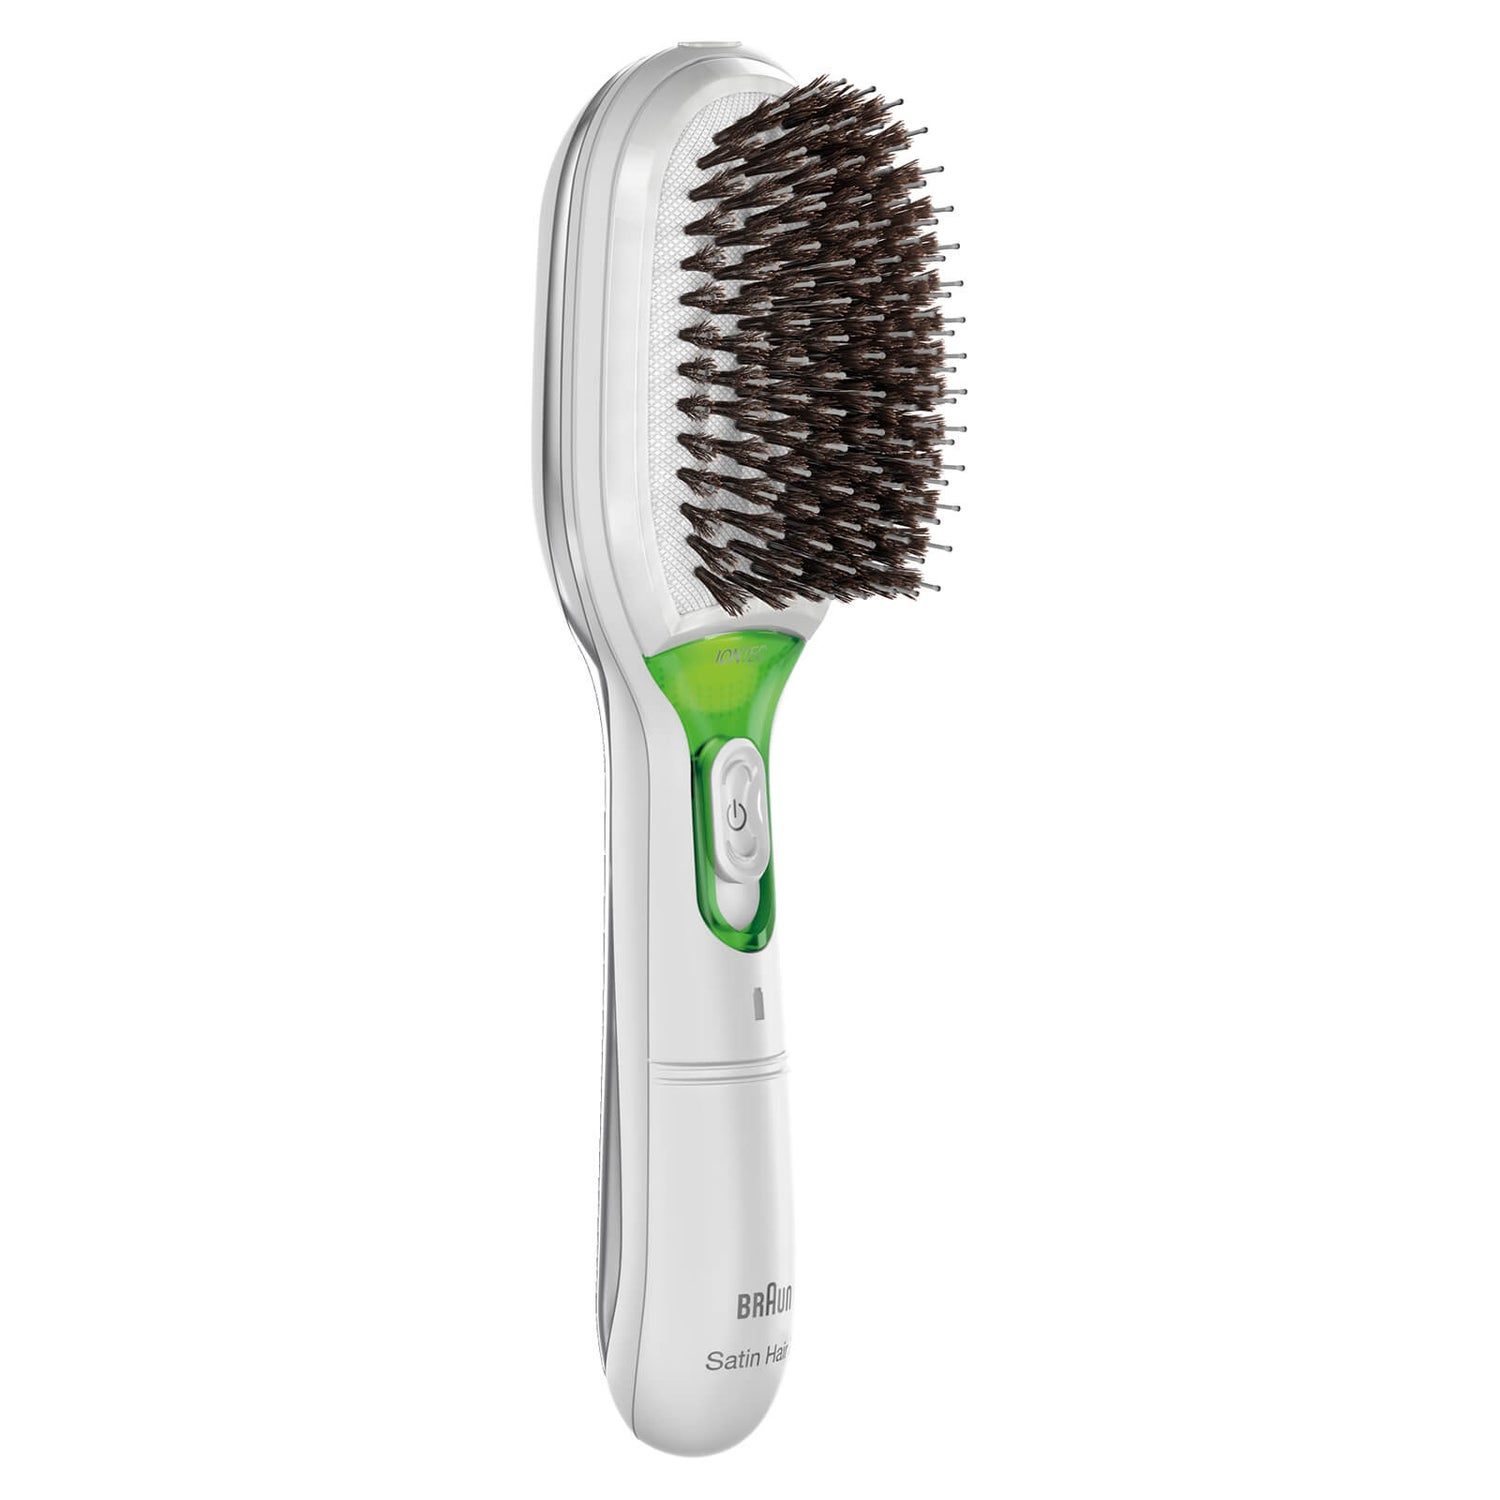 reality charity Diver Braun BR750 Iontech Hair Brush - White | lookfantastic HK